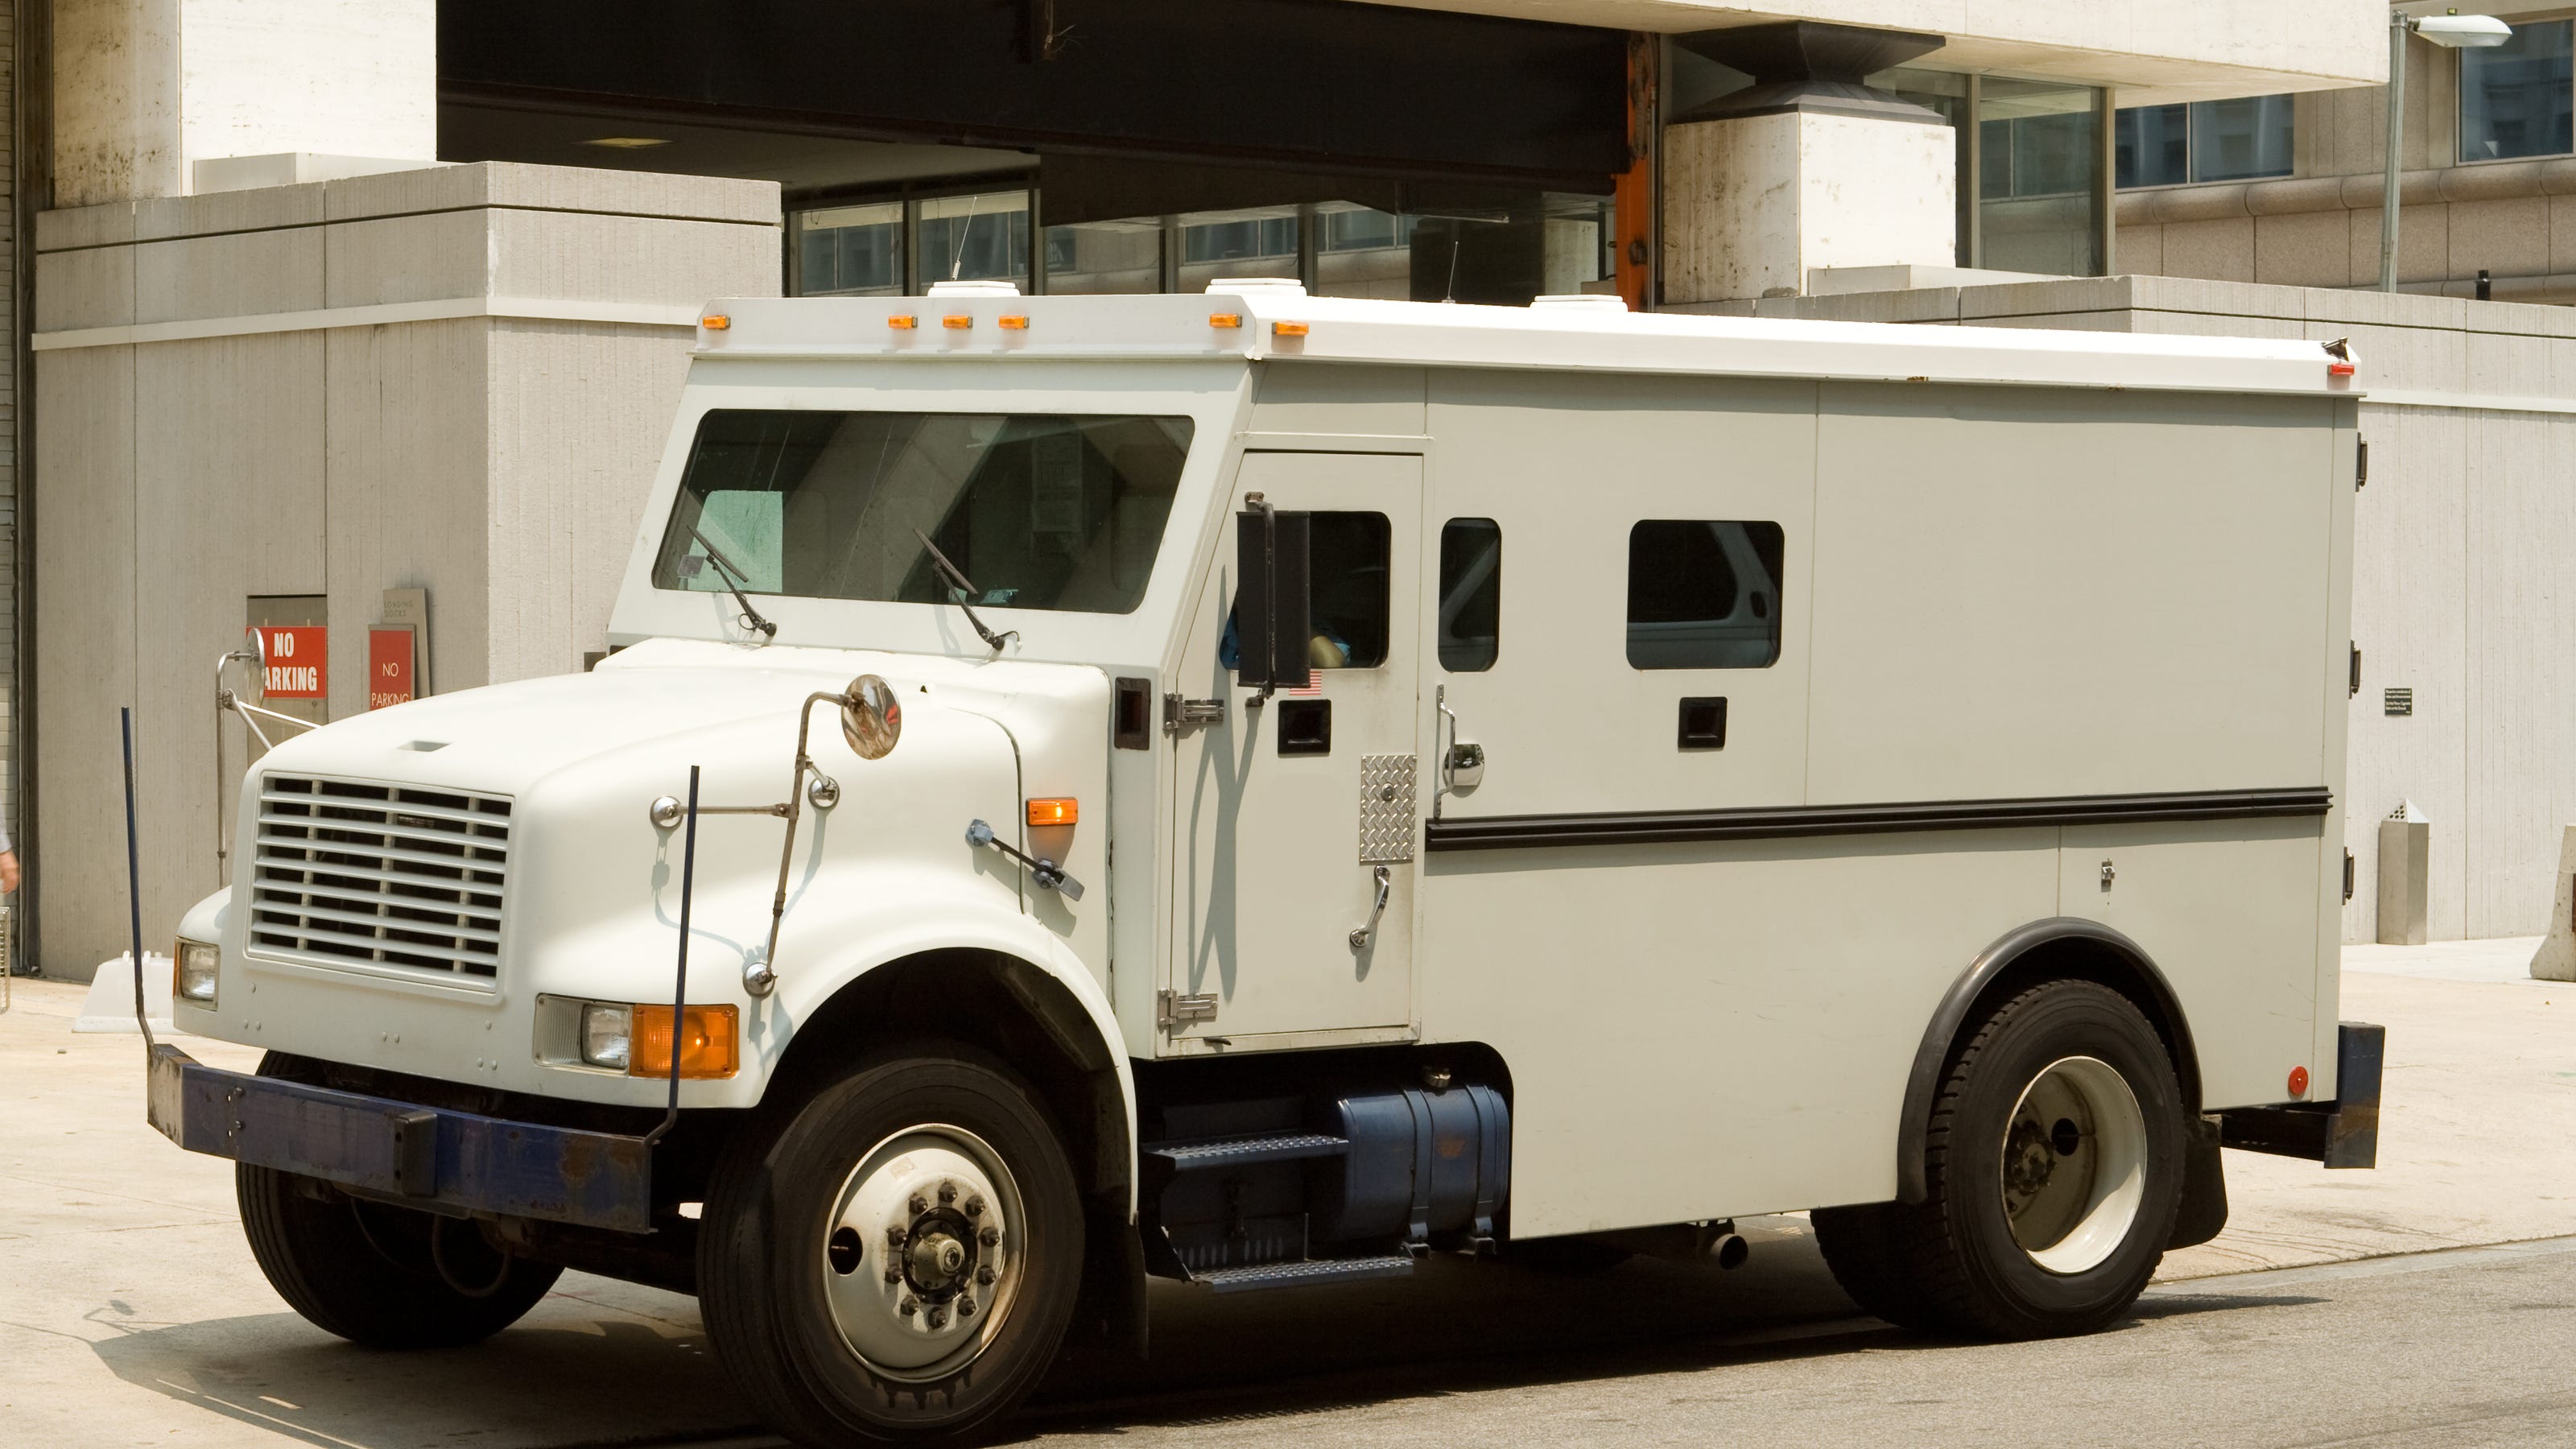  A look at the richest and most notable armored car thefts in history 